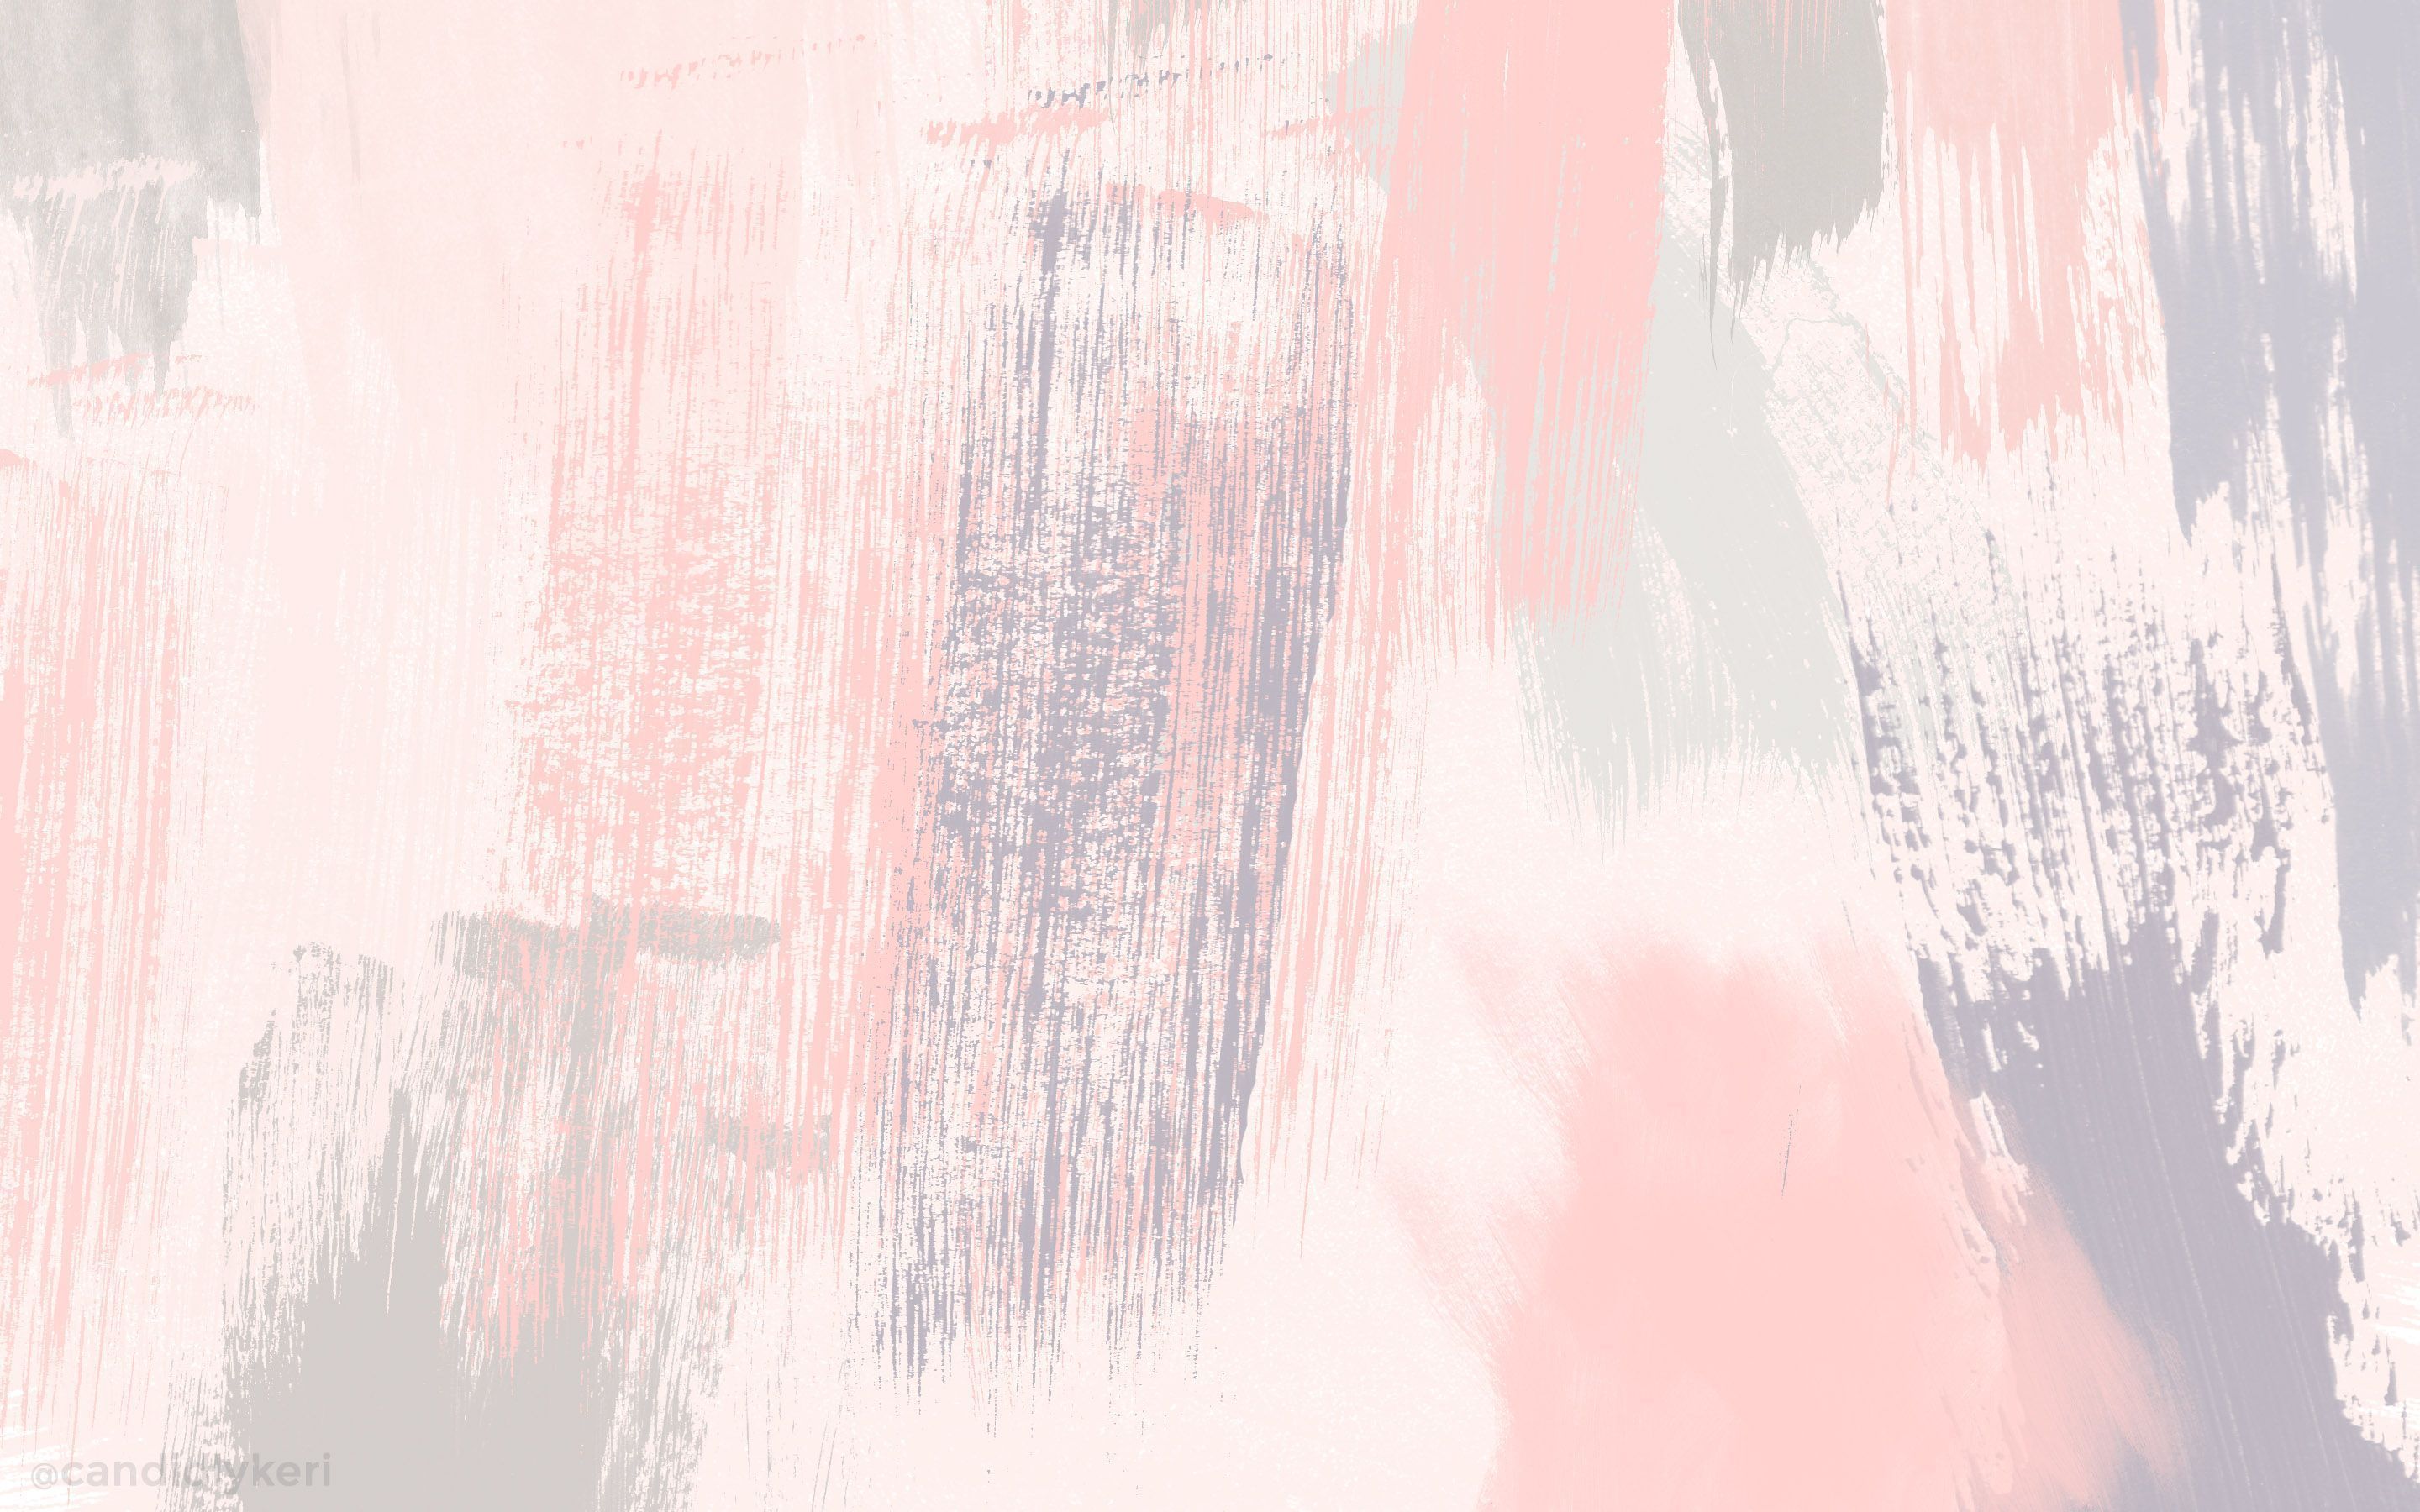 A pink and gray abstract painting - Desktop, pastel, pastel orange